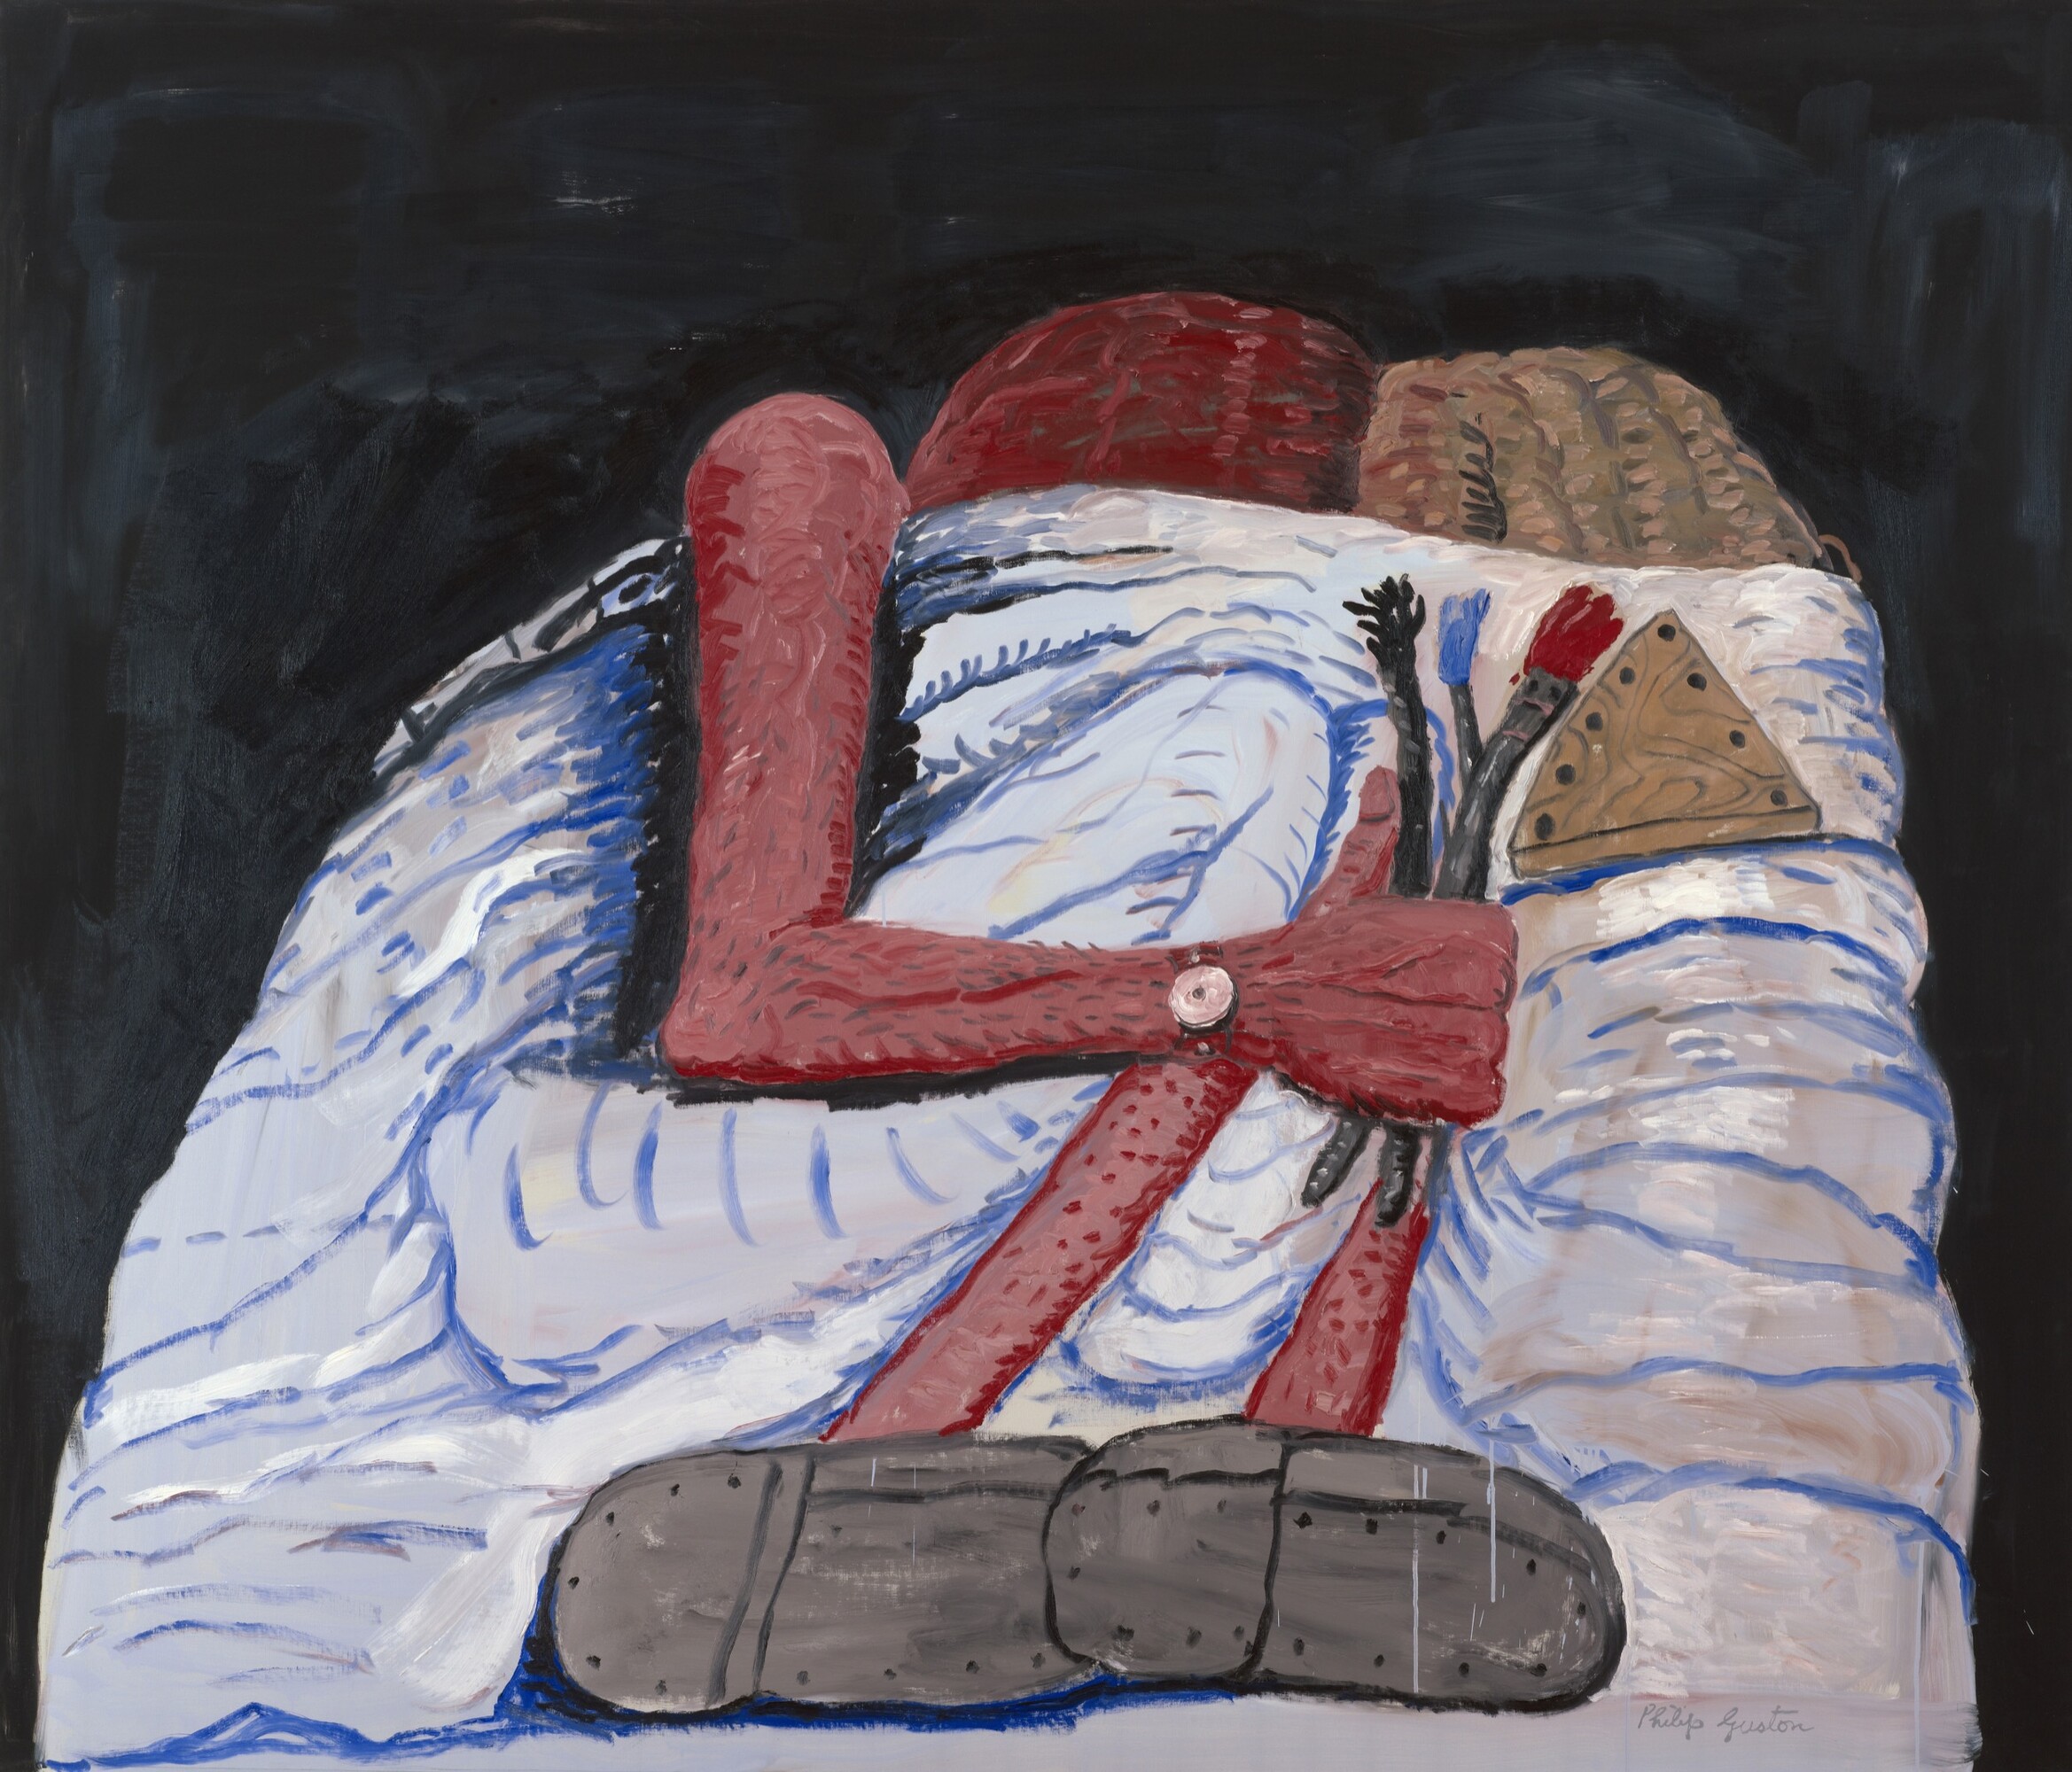 Philip Guston, Couple in Bed, 1977, oil on canvas, 20.6 × 24.0 cm, the Art Institute of Chicago. © The Estate of Philip Guston, courtesy Hauser &amp; Wirth